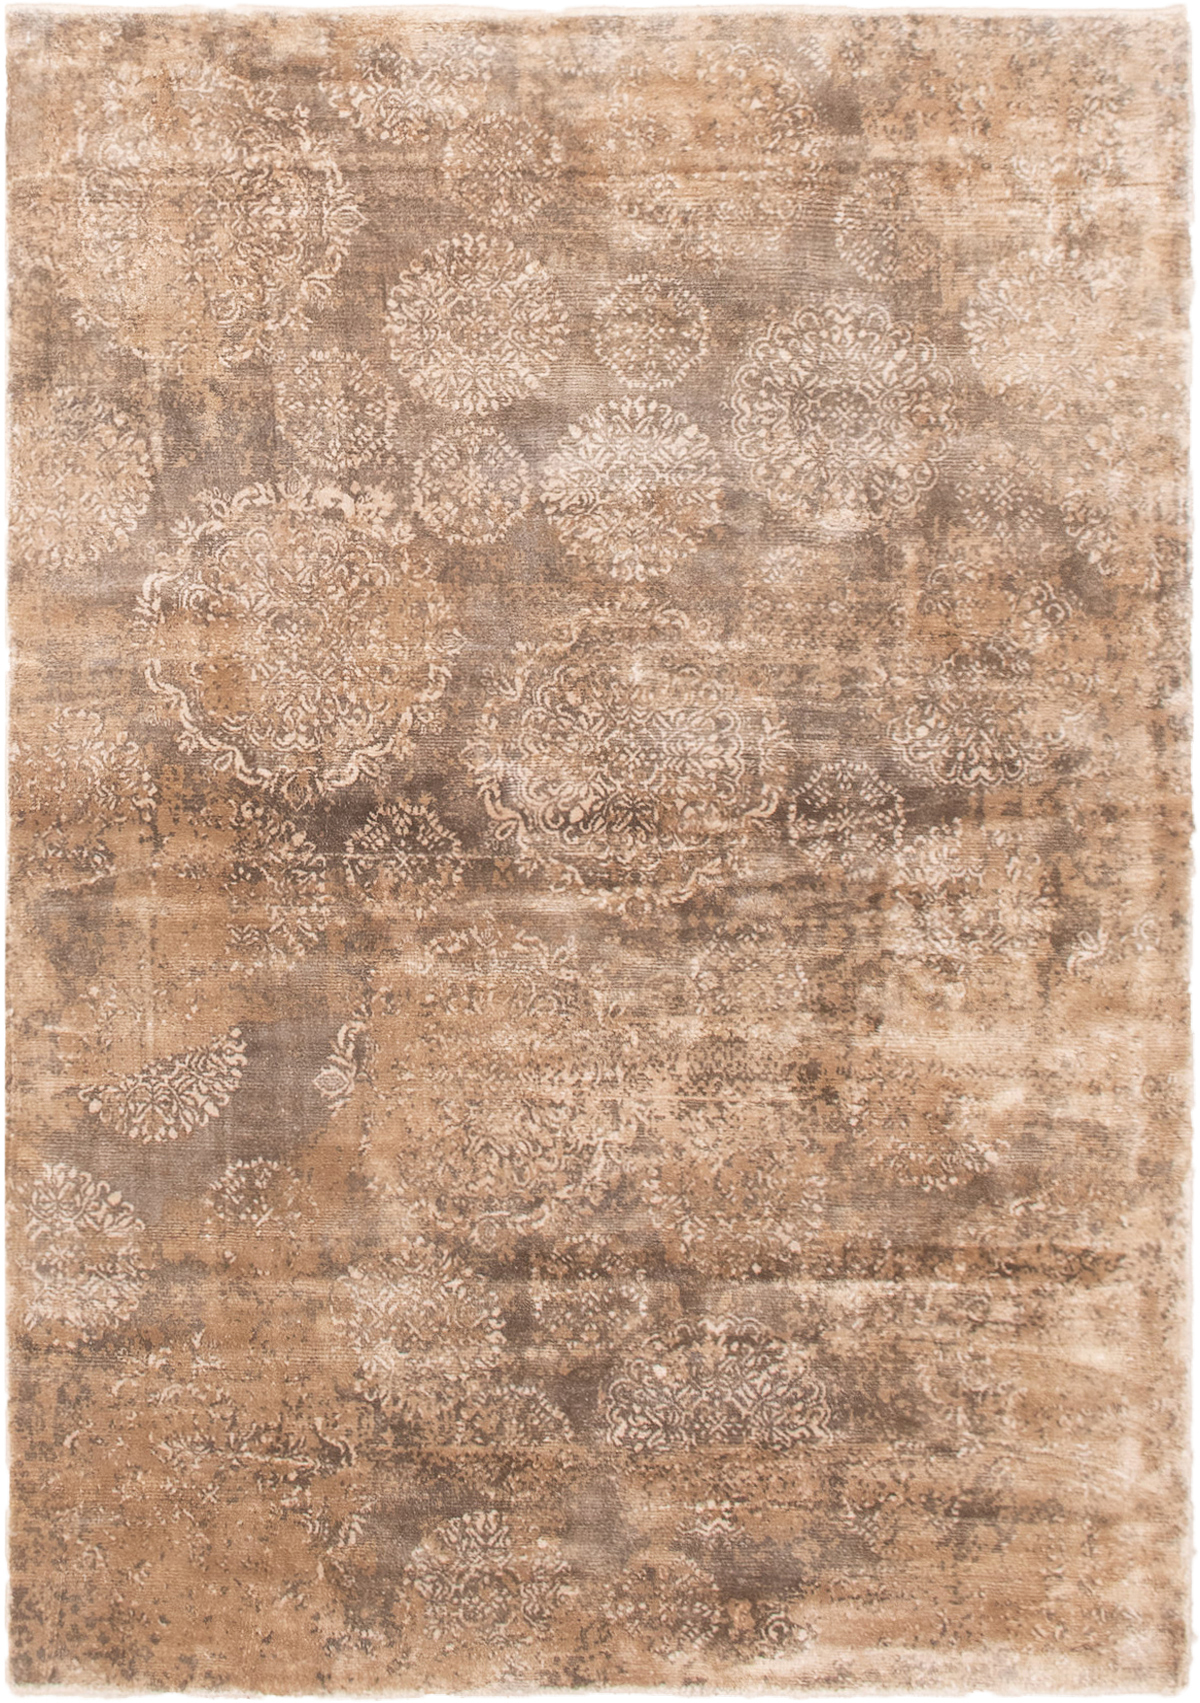 Hand-knotted Galleria Tan  Rug 4'9" x 6'9" Size: 4'9" x 6'9"  